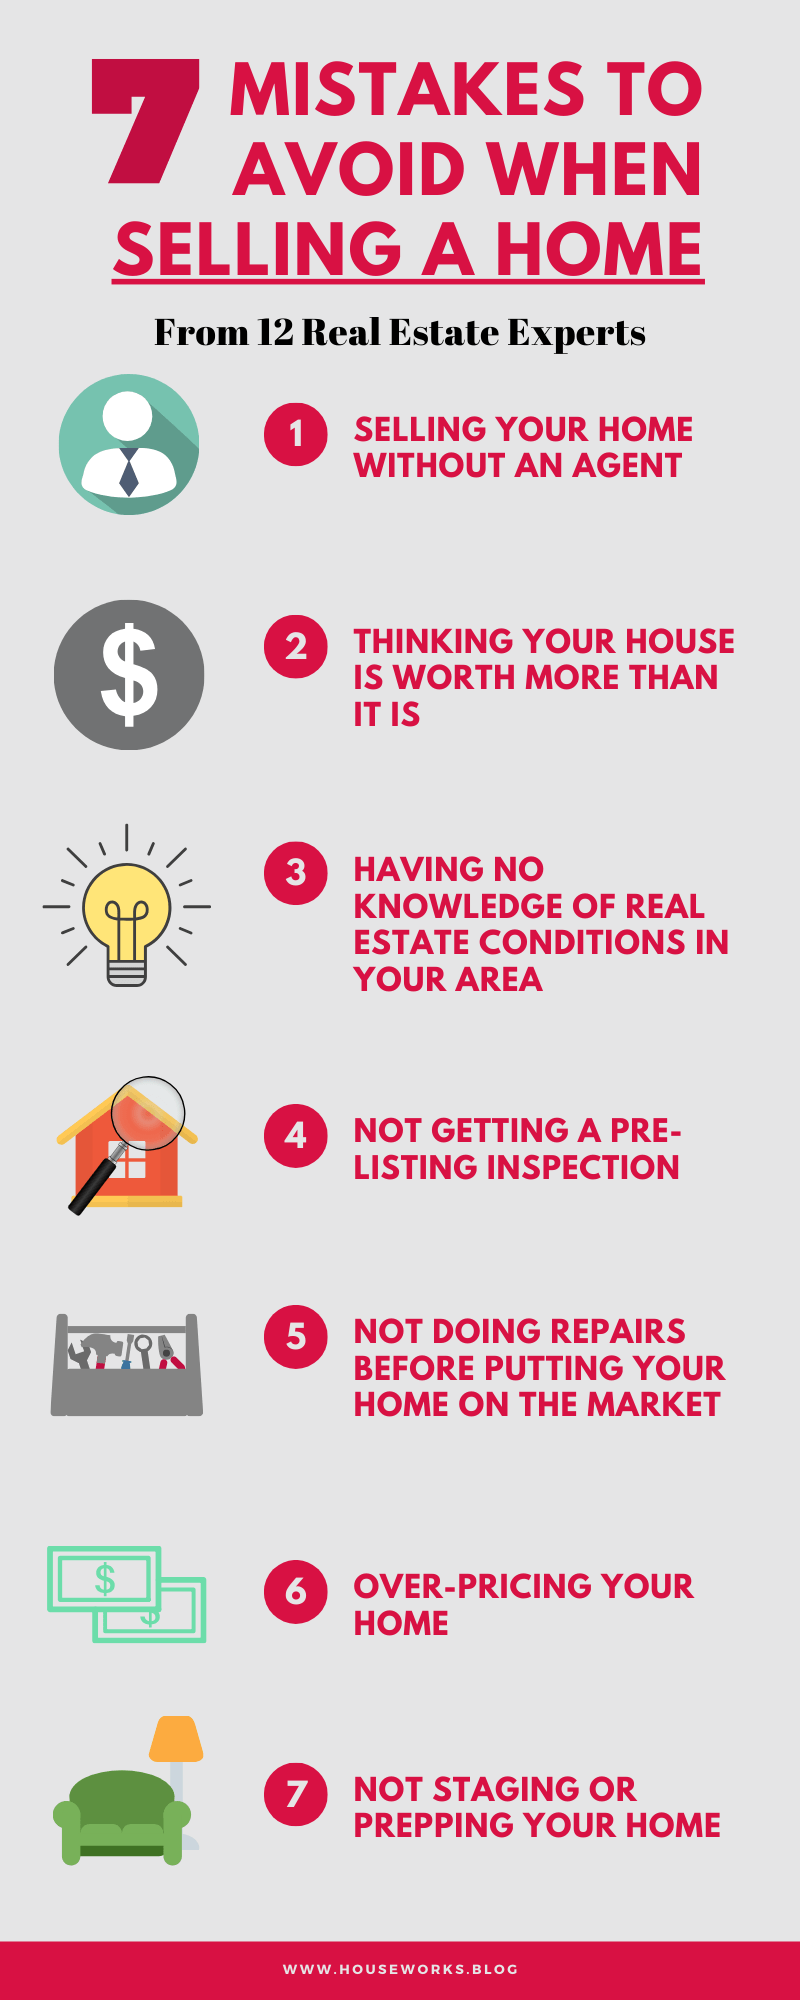 7 mistakes to avoid making when selling a home